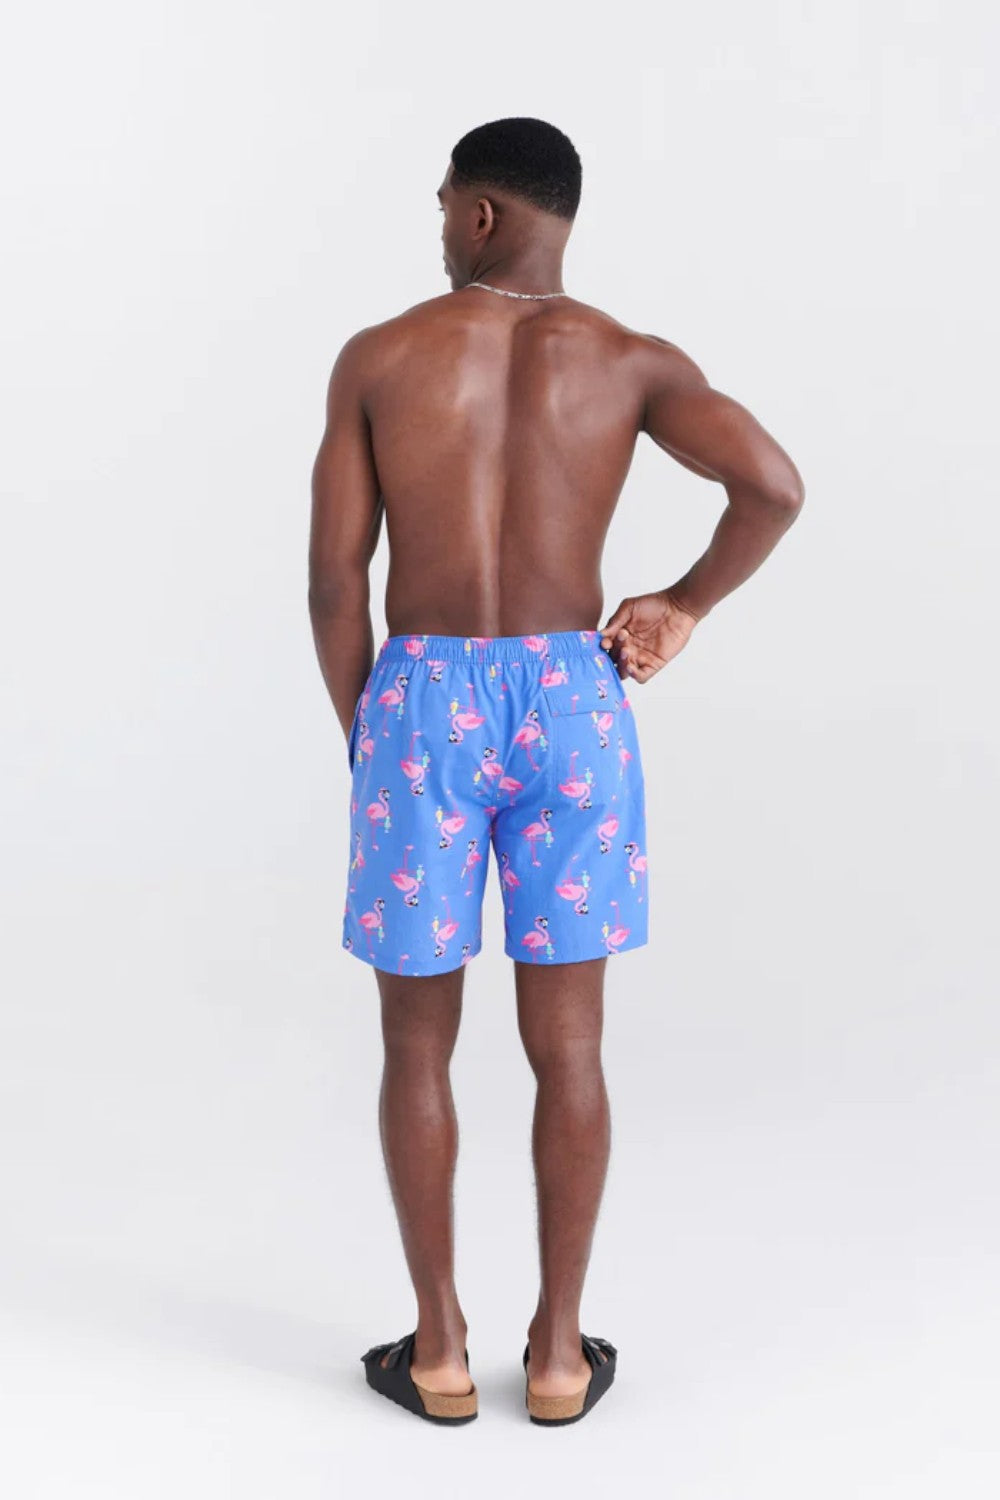 Made for quick dips, park sips, and days out in the sun. Go Coastal is a retro-inspired swim short equipped with a DropTemp Cooling Hydro Liner and the BallPark Pouch. Built from the inside out, the liner is super-light for quick-dry comfort while the patented pouch holds everything in place.